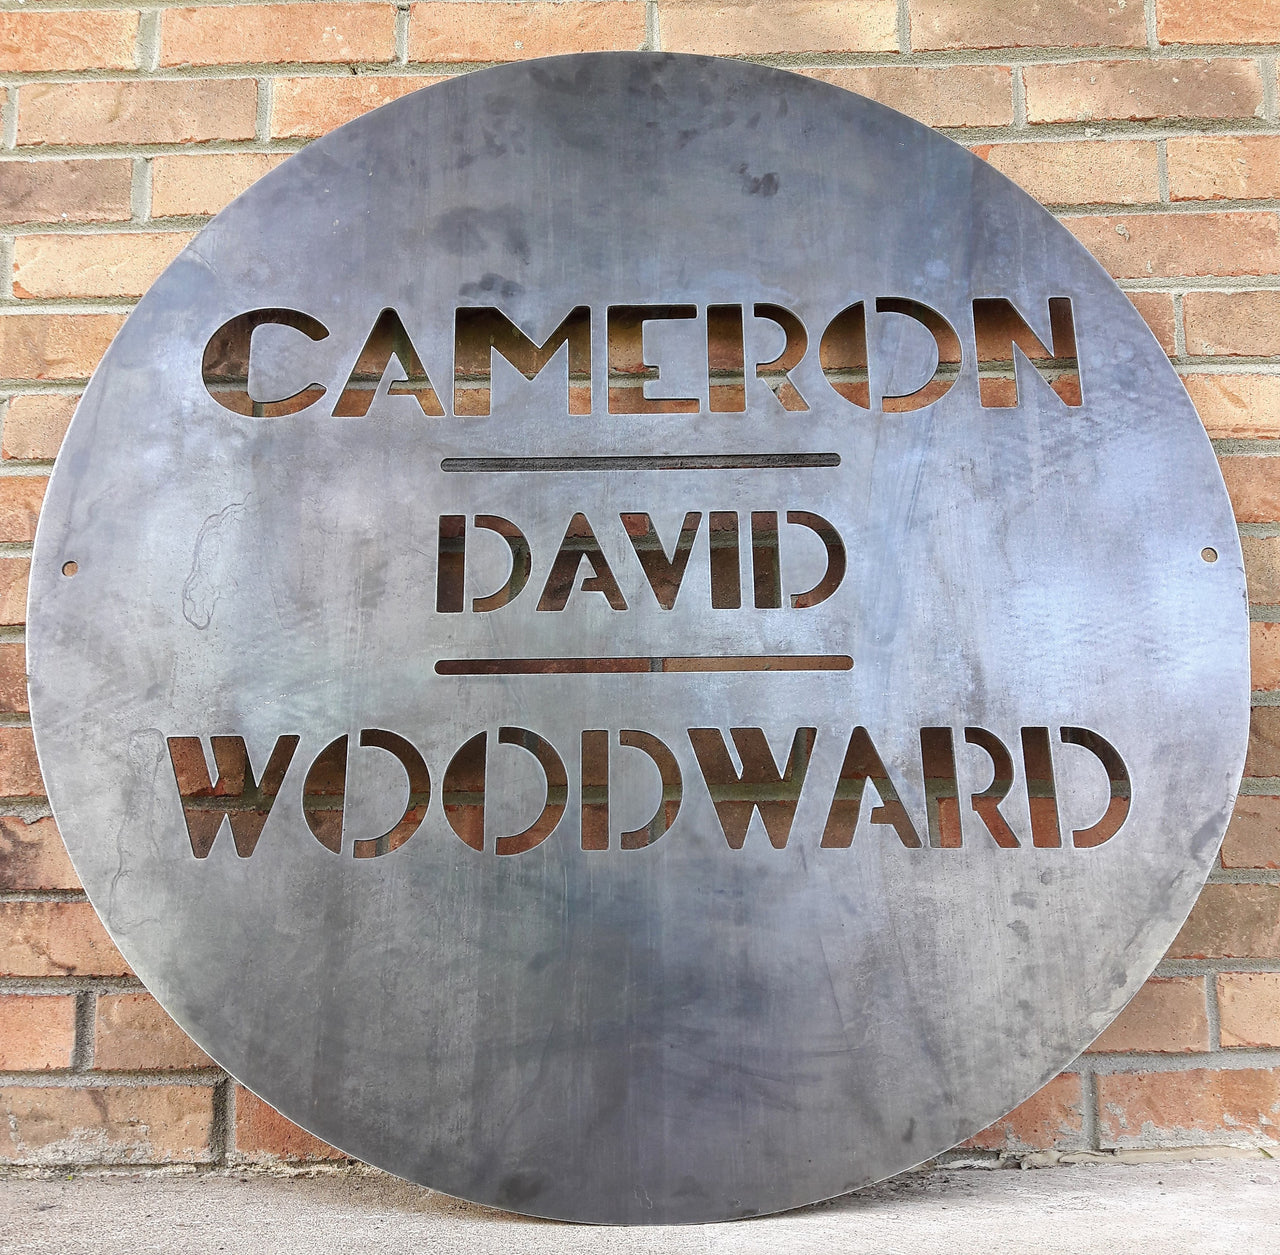 This is a round art deco sign that has three lines of text with a straight line seperating them. The sign reads, "Cameron David Woodward"